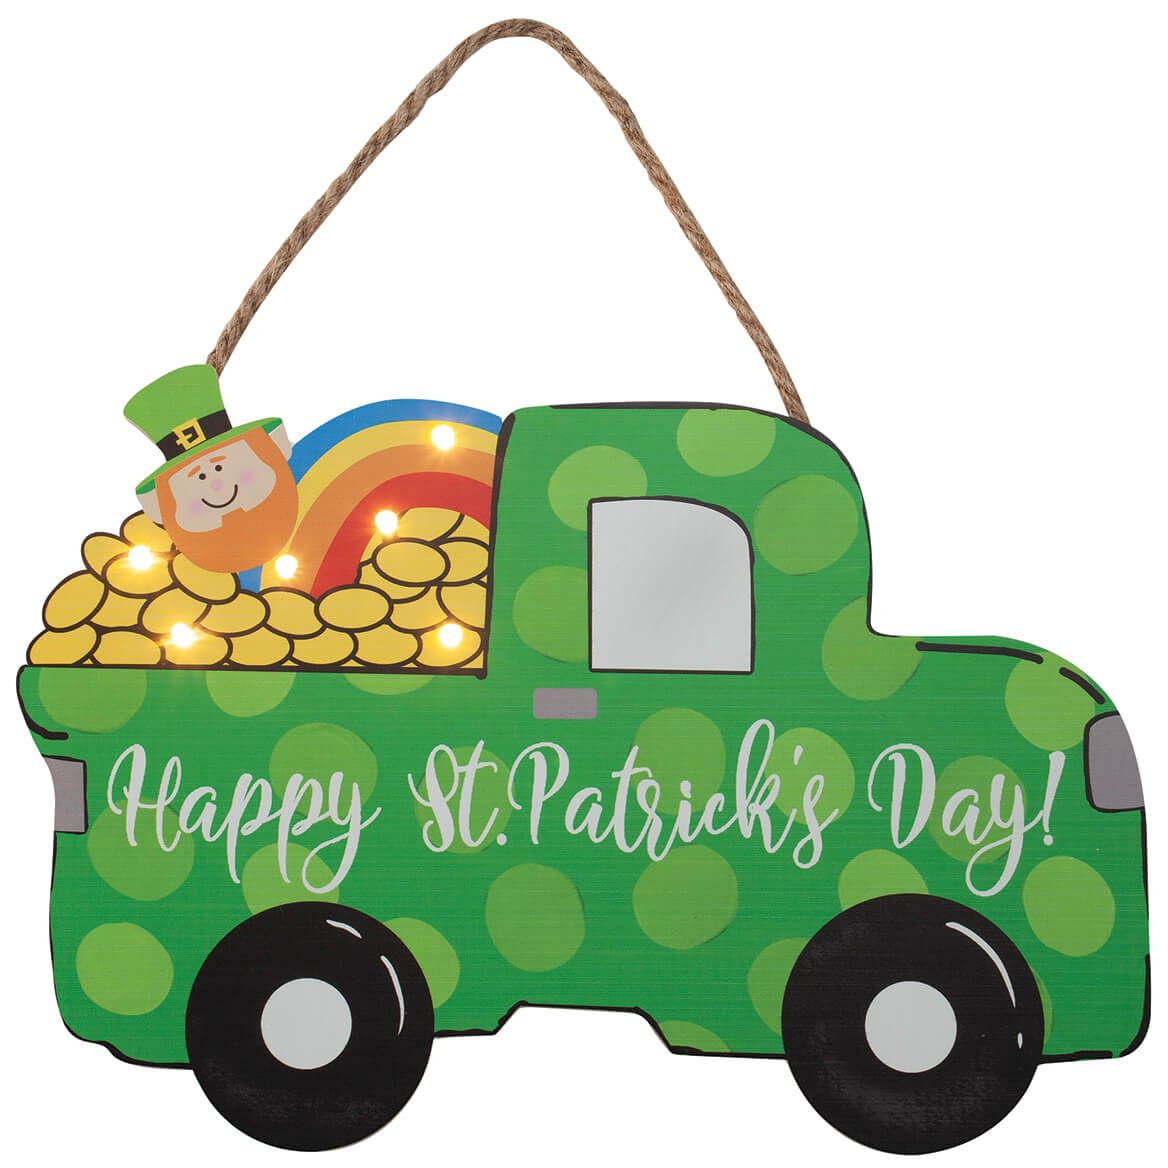 St. Patrick's Day Truck Lighted Hanger by Holiday Peak™ + '-' + 372421